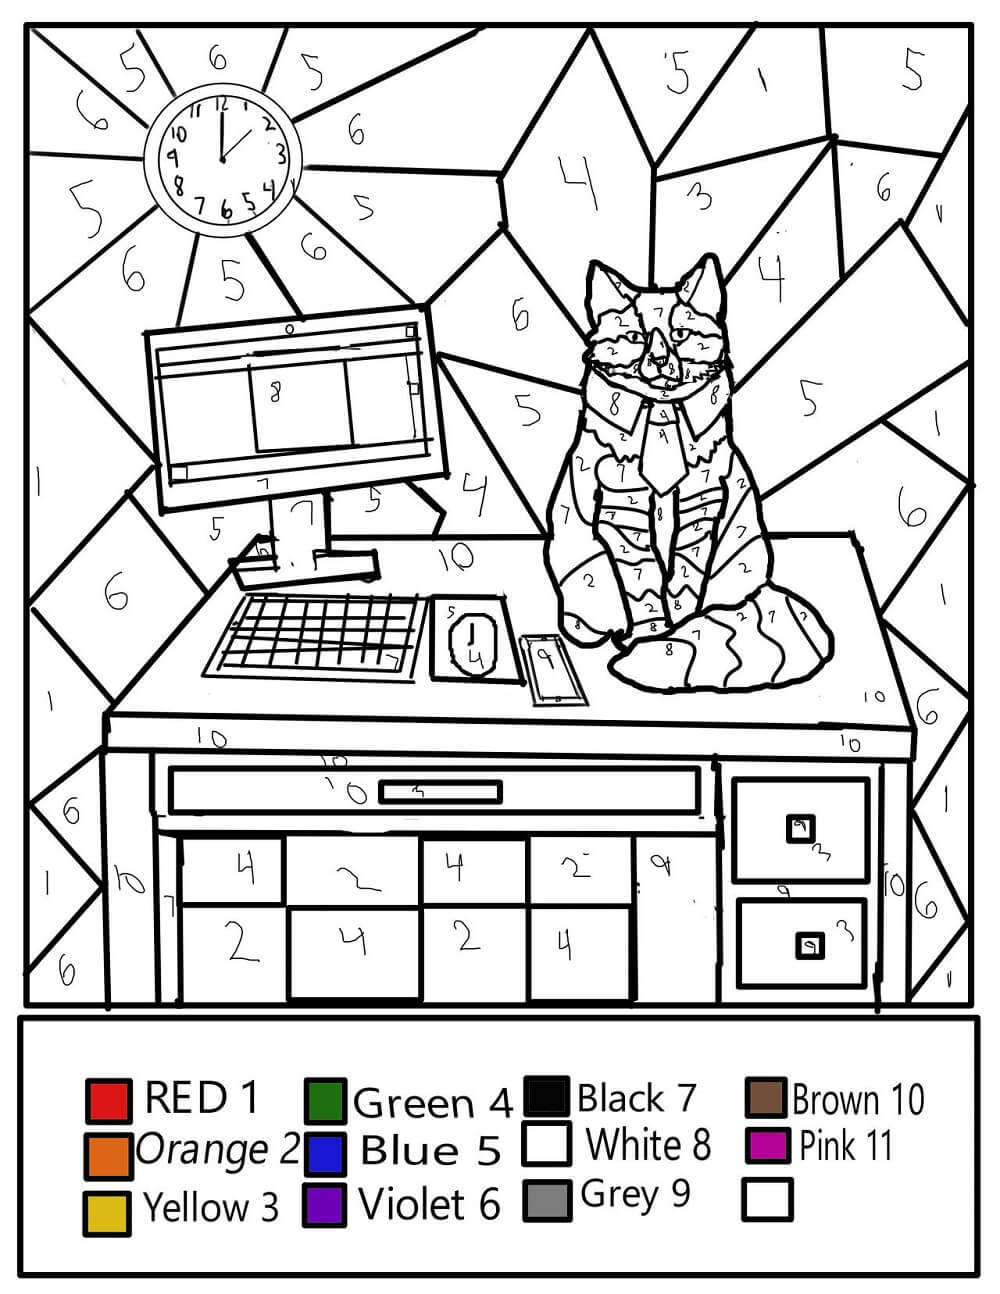 The cat is on the computer desk color by number